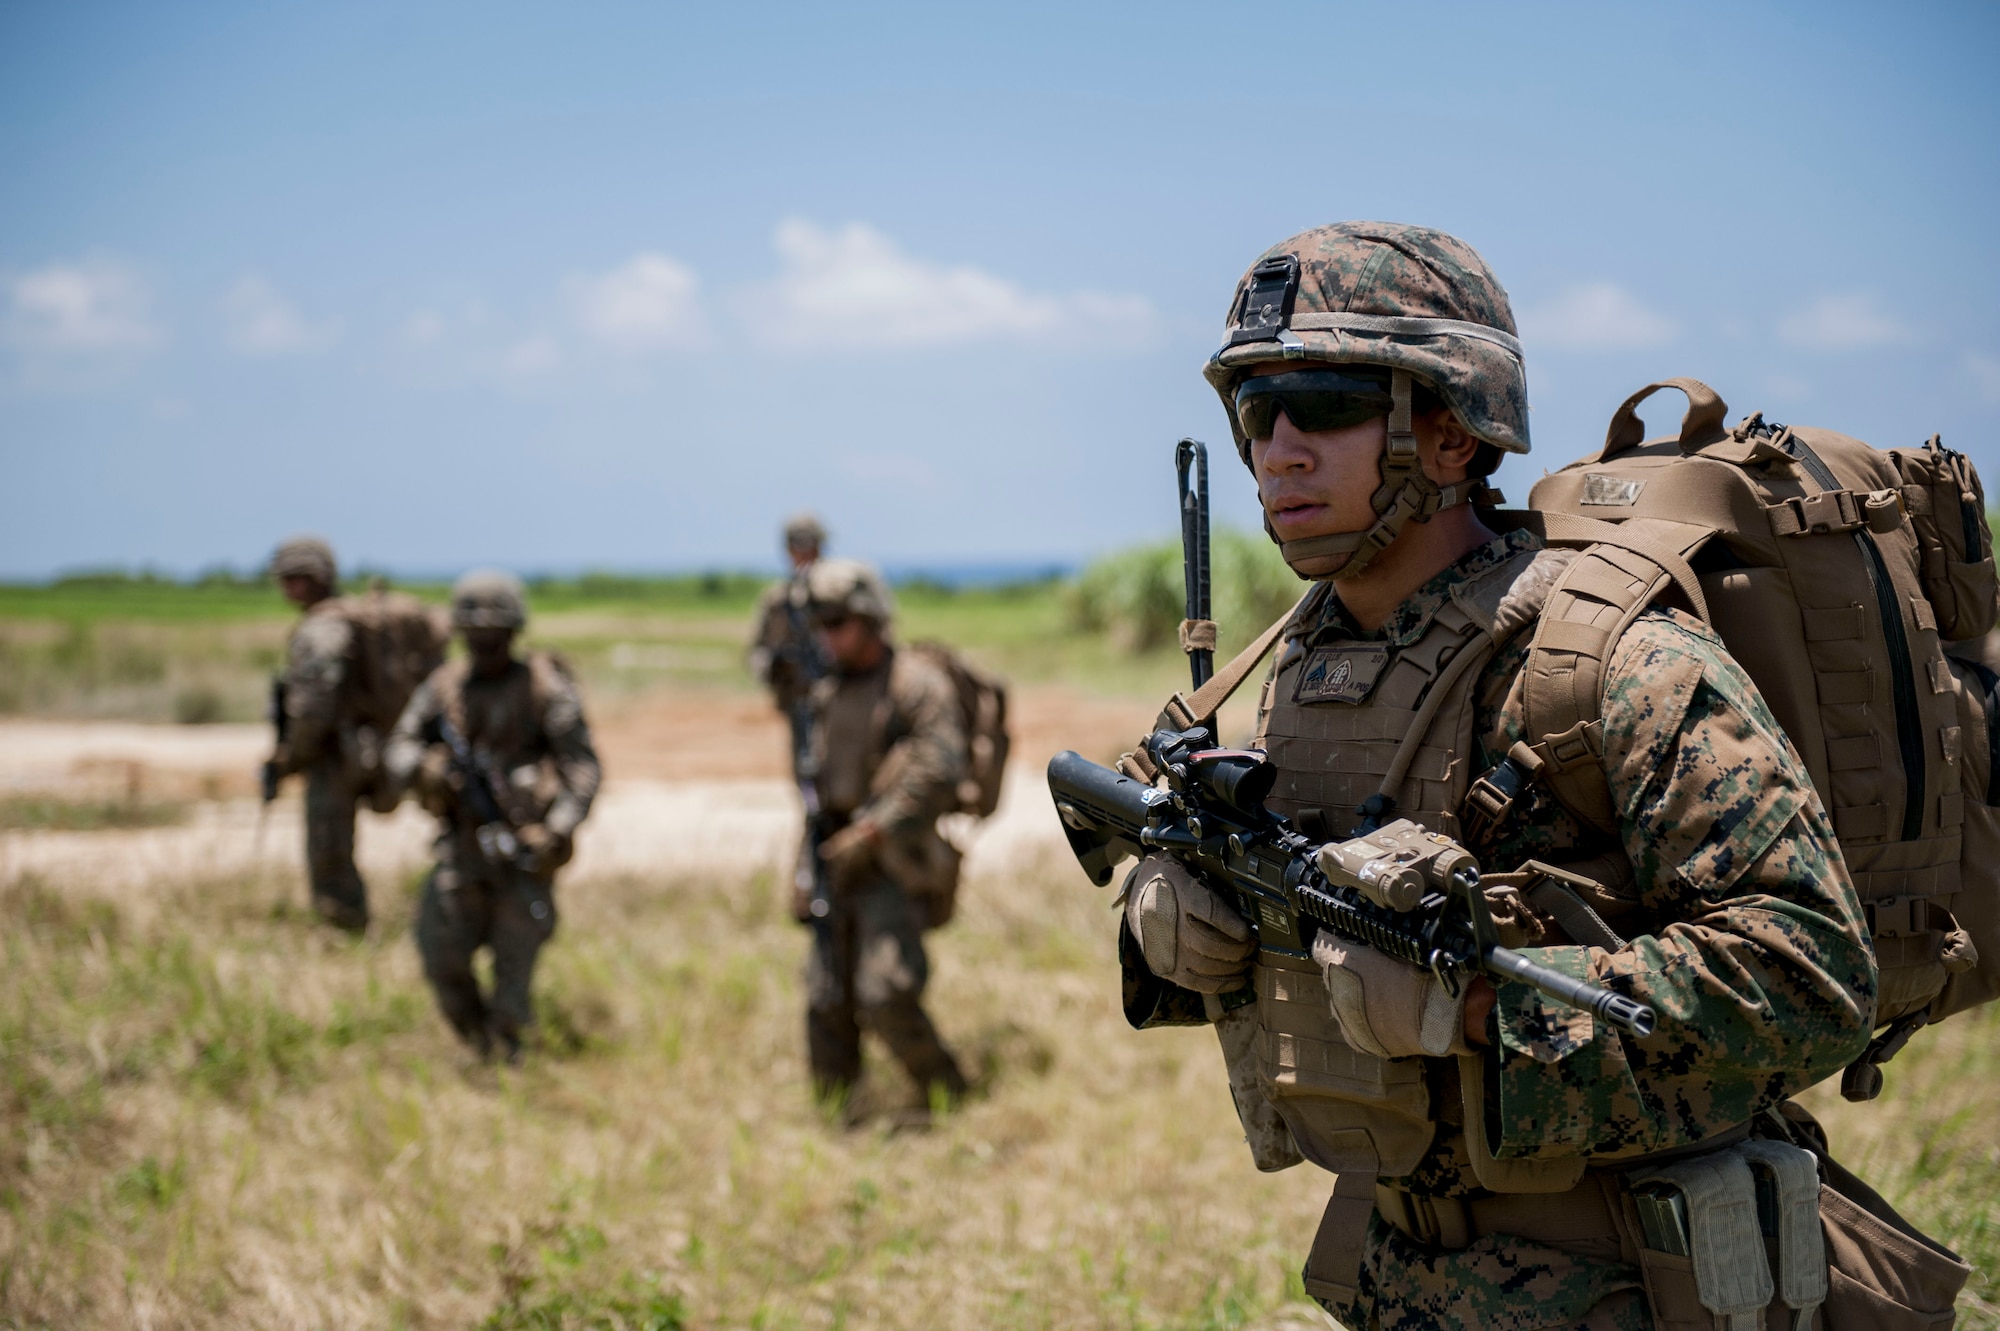 U.S. Marine Corps Cpl. James Ellis, Golf Company, 2nd Battalion, 2nd Marine Regiment squad leader assigned to Marine Corps Base Camp Lejeune, N.C., leads his fire team toward an objective during an airfield seizure exercise July 20, 2016, at Iejima airfield, Japan. Ellis and other Marines of Golf Company performed a simulated airfield seizure at Iejima to test their capability for a long-range joint operation with the U.S. Air Force 353rd Special Operations Squadron assigned to Kadena Air Base, Japan. (U.S. Air Force Photo by Senior Airman Peter Reft) 